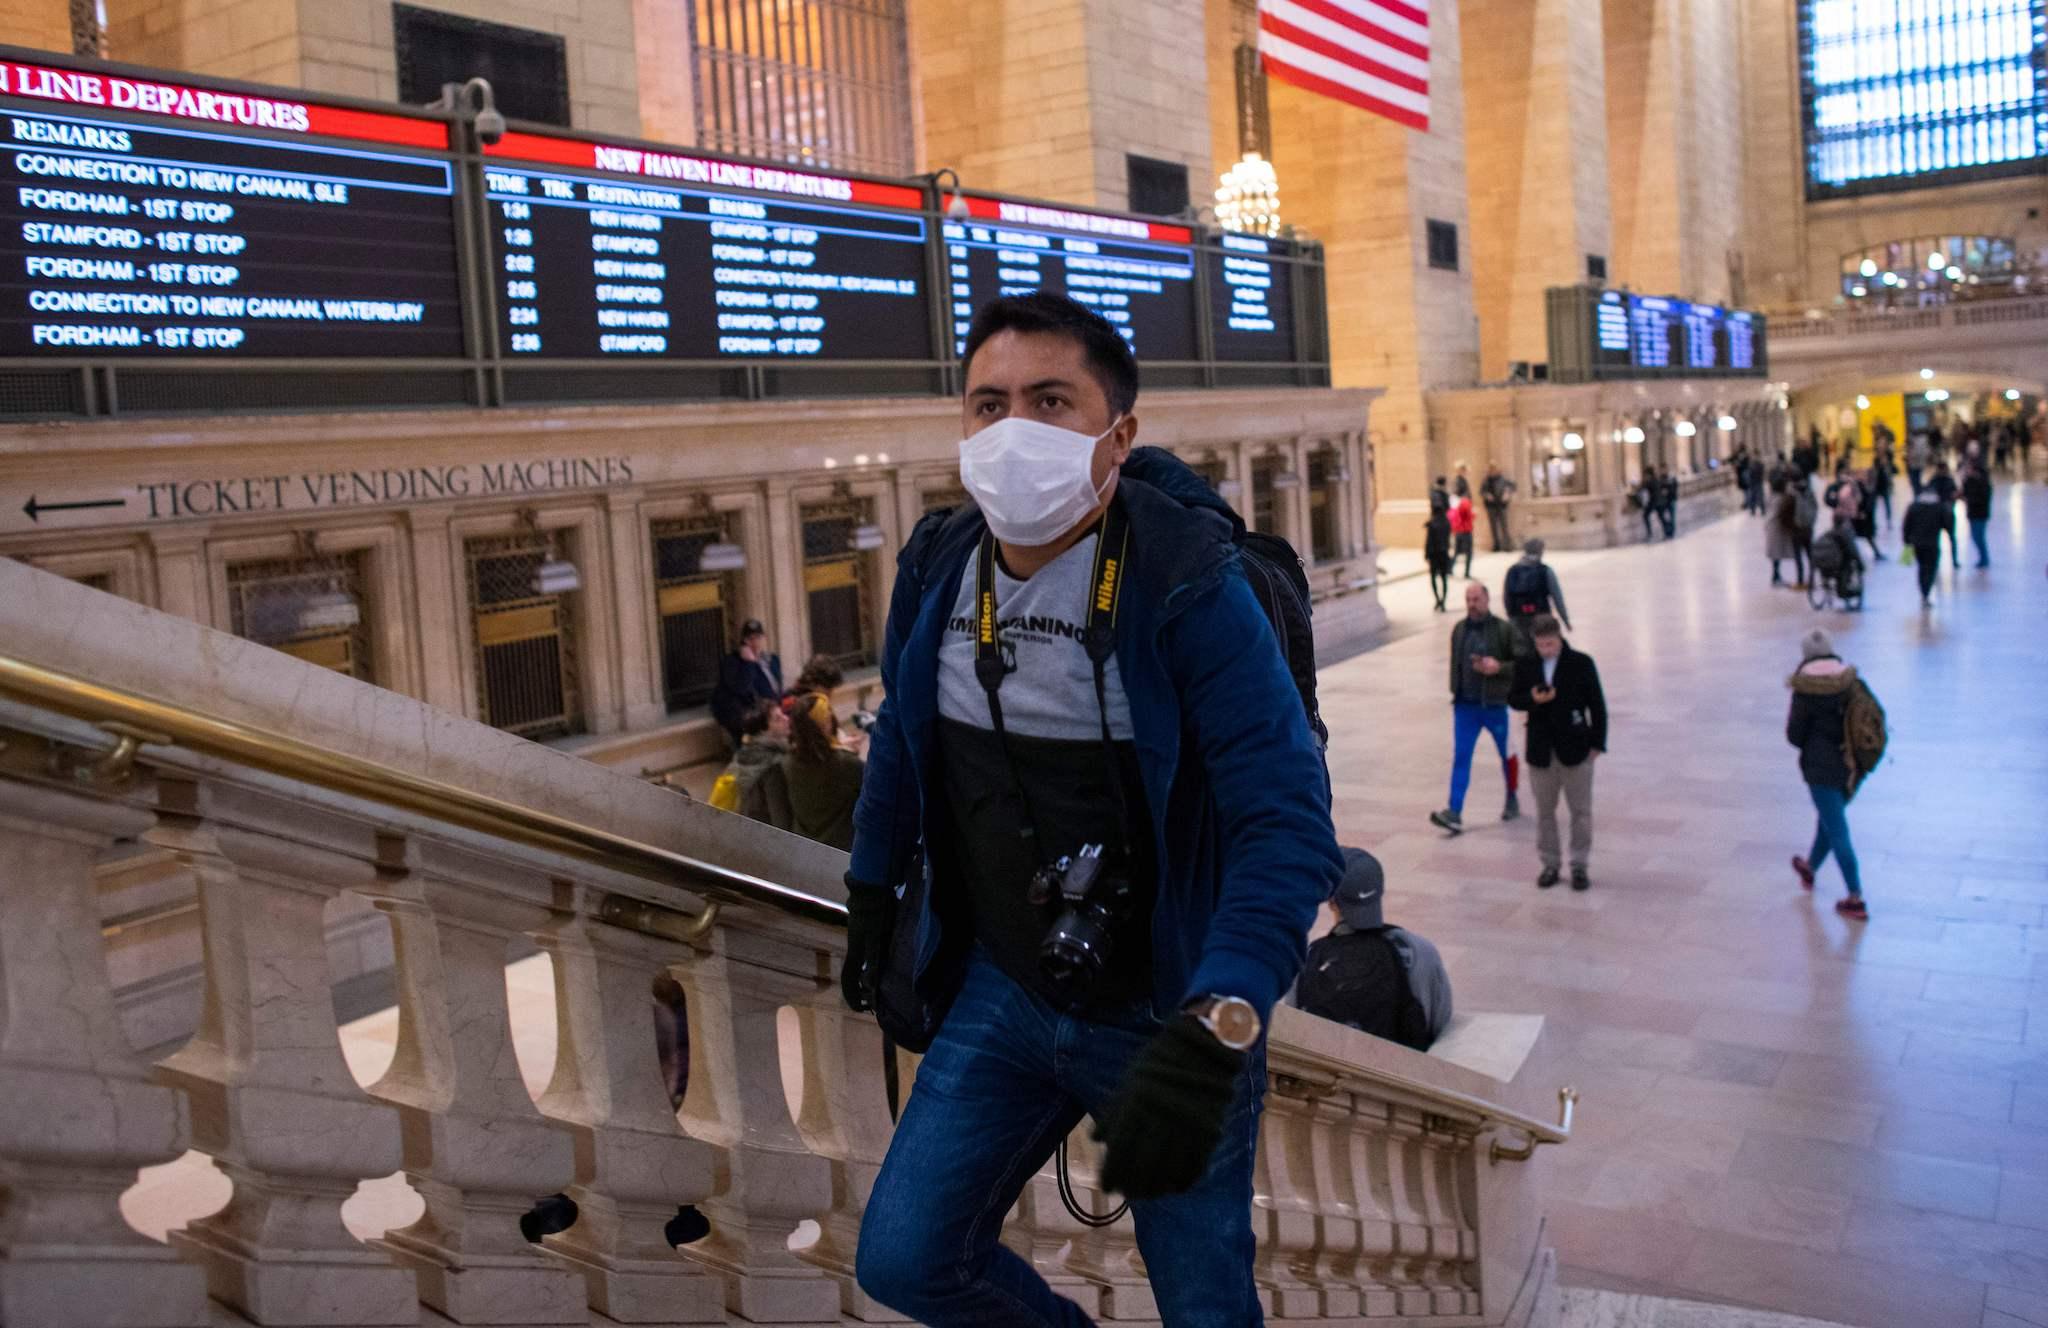 A man wears a face mask as he walks inside Grand Central Station on March 8, 2020 in New York City